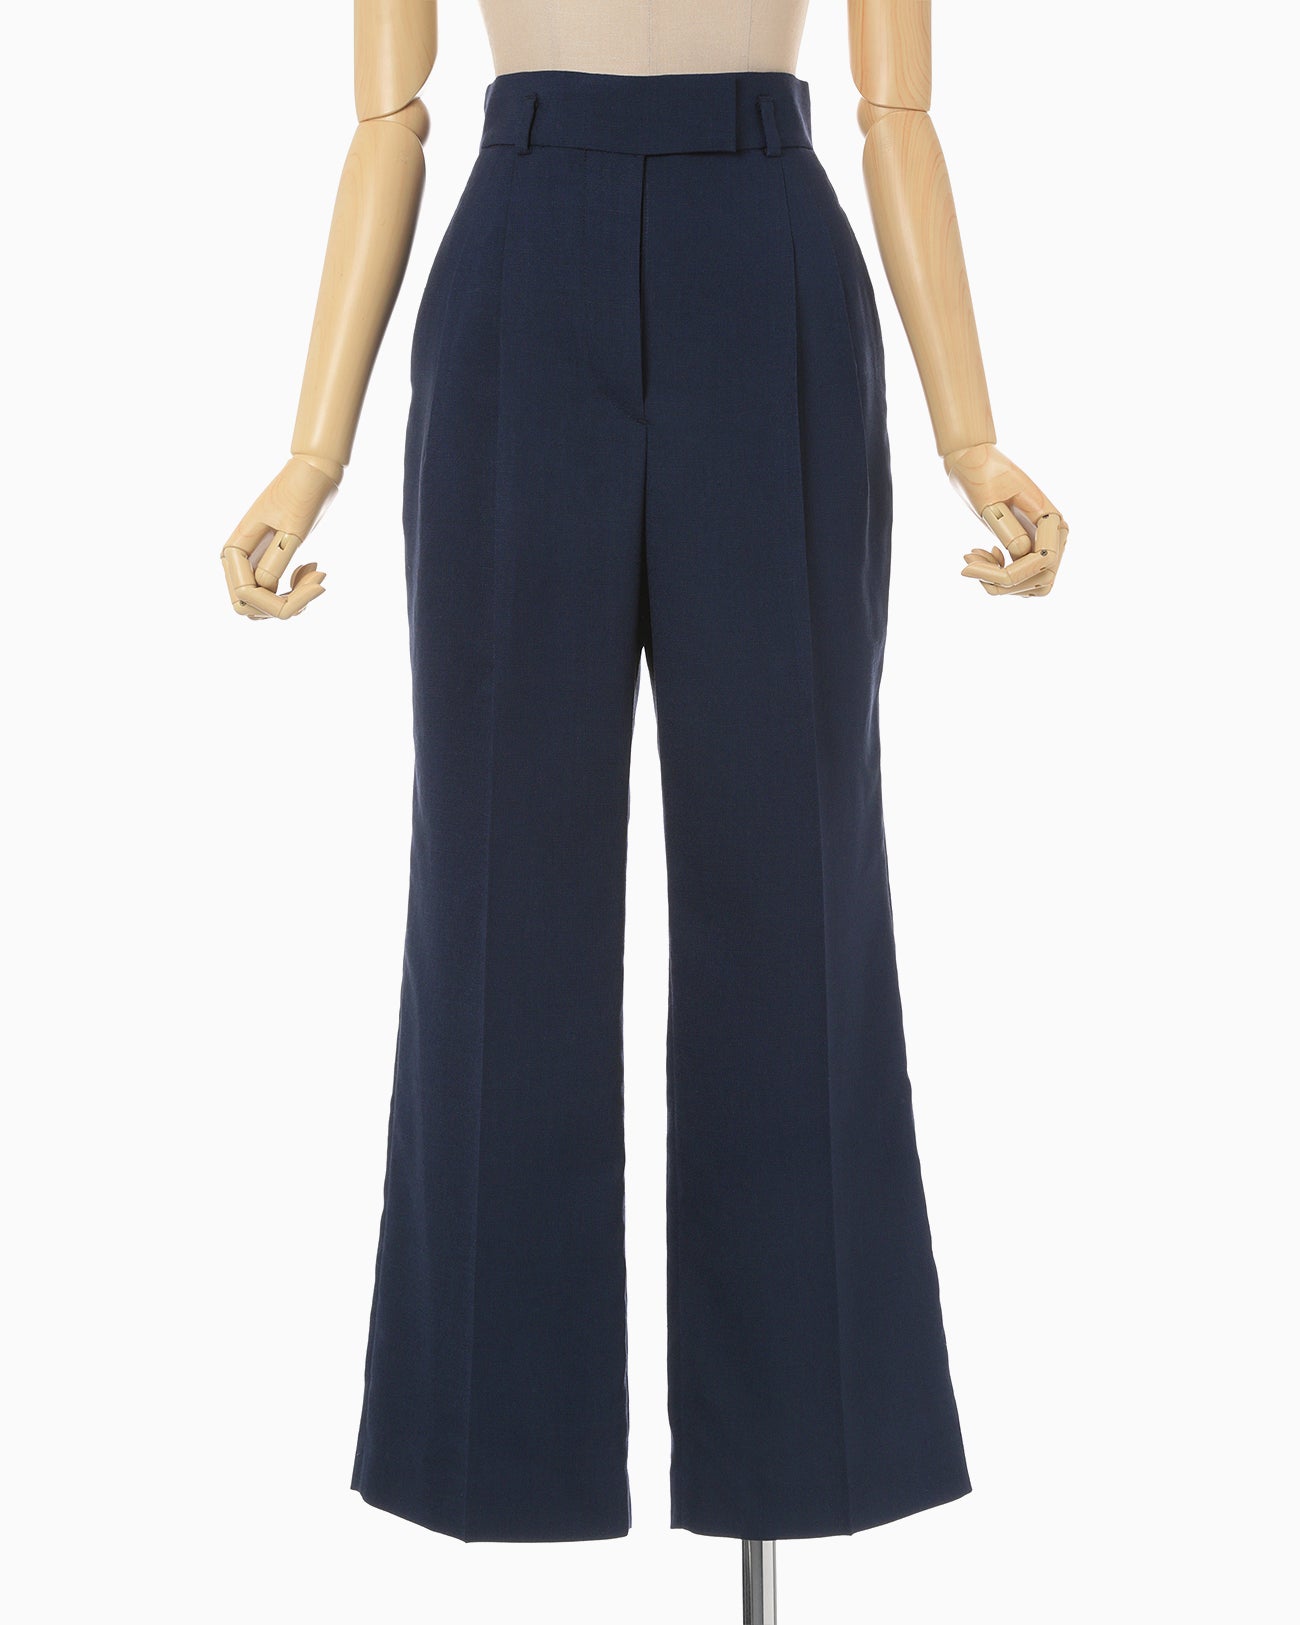 Linen Touch Triacetate Cropped Trousers - navy